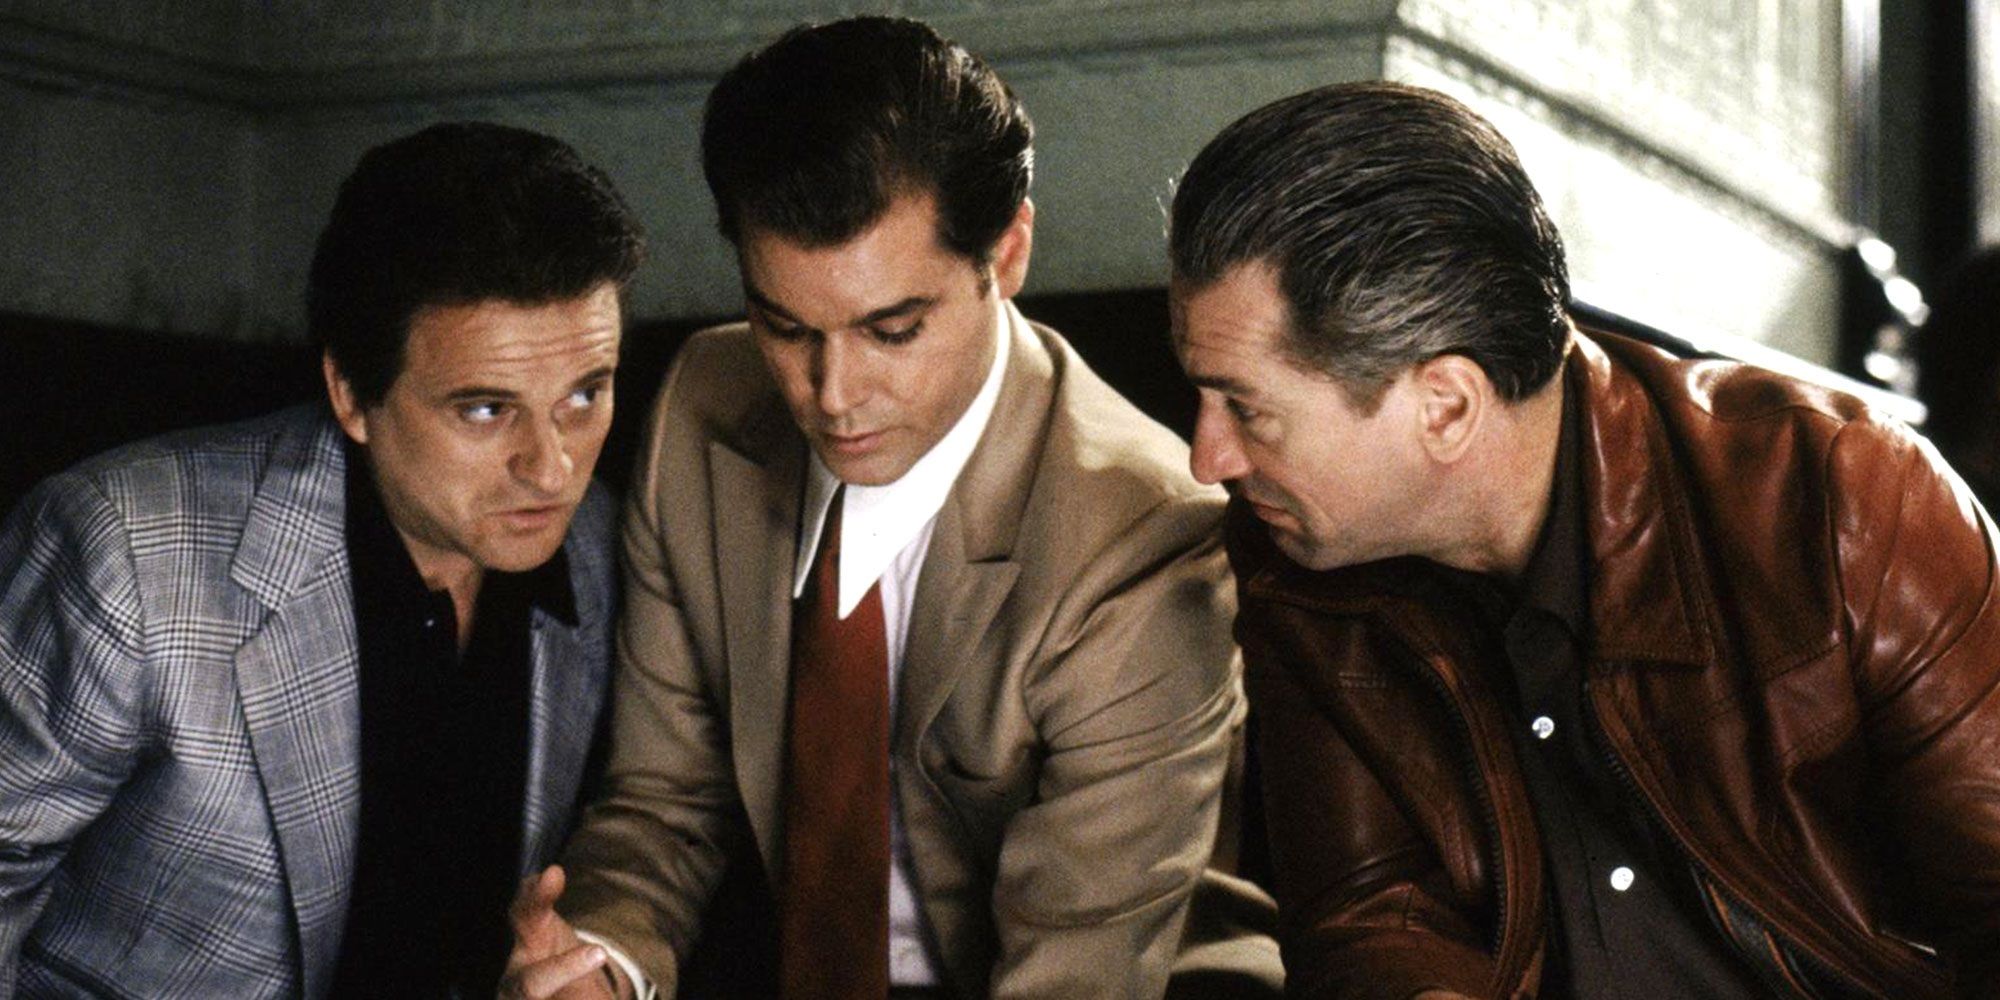 Henry, Jimmy, and Tommy in Goodfellas